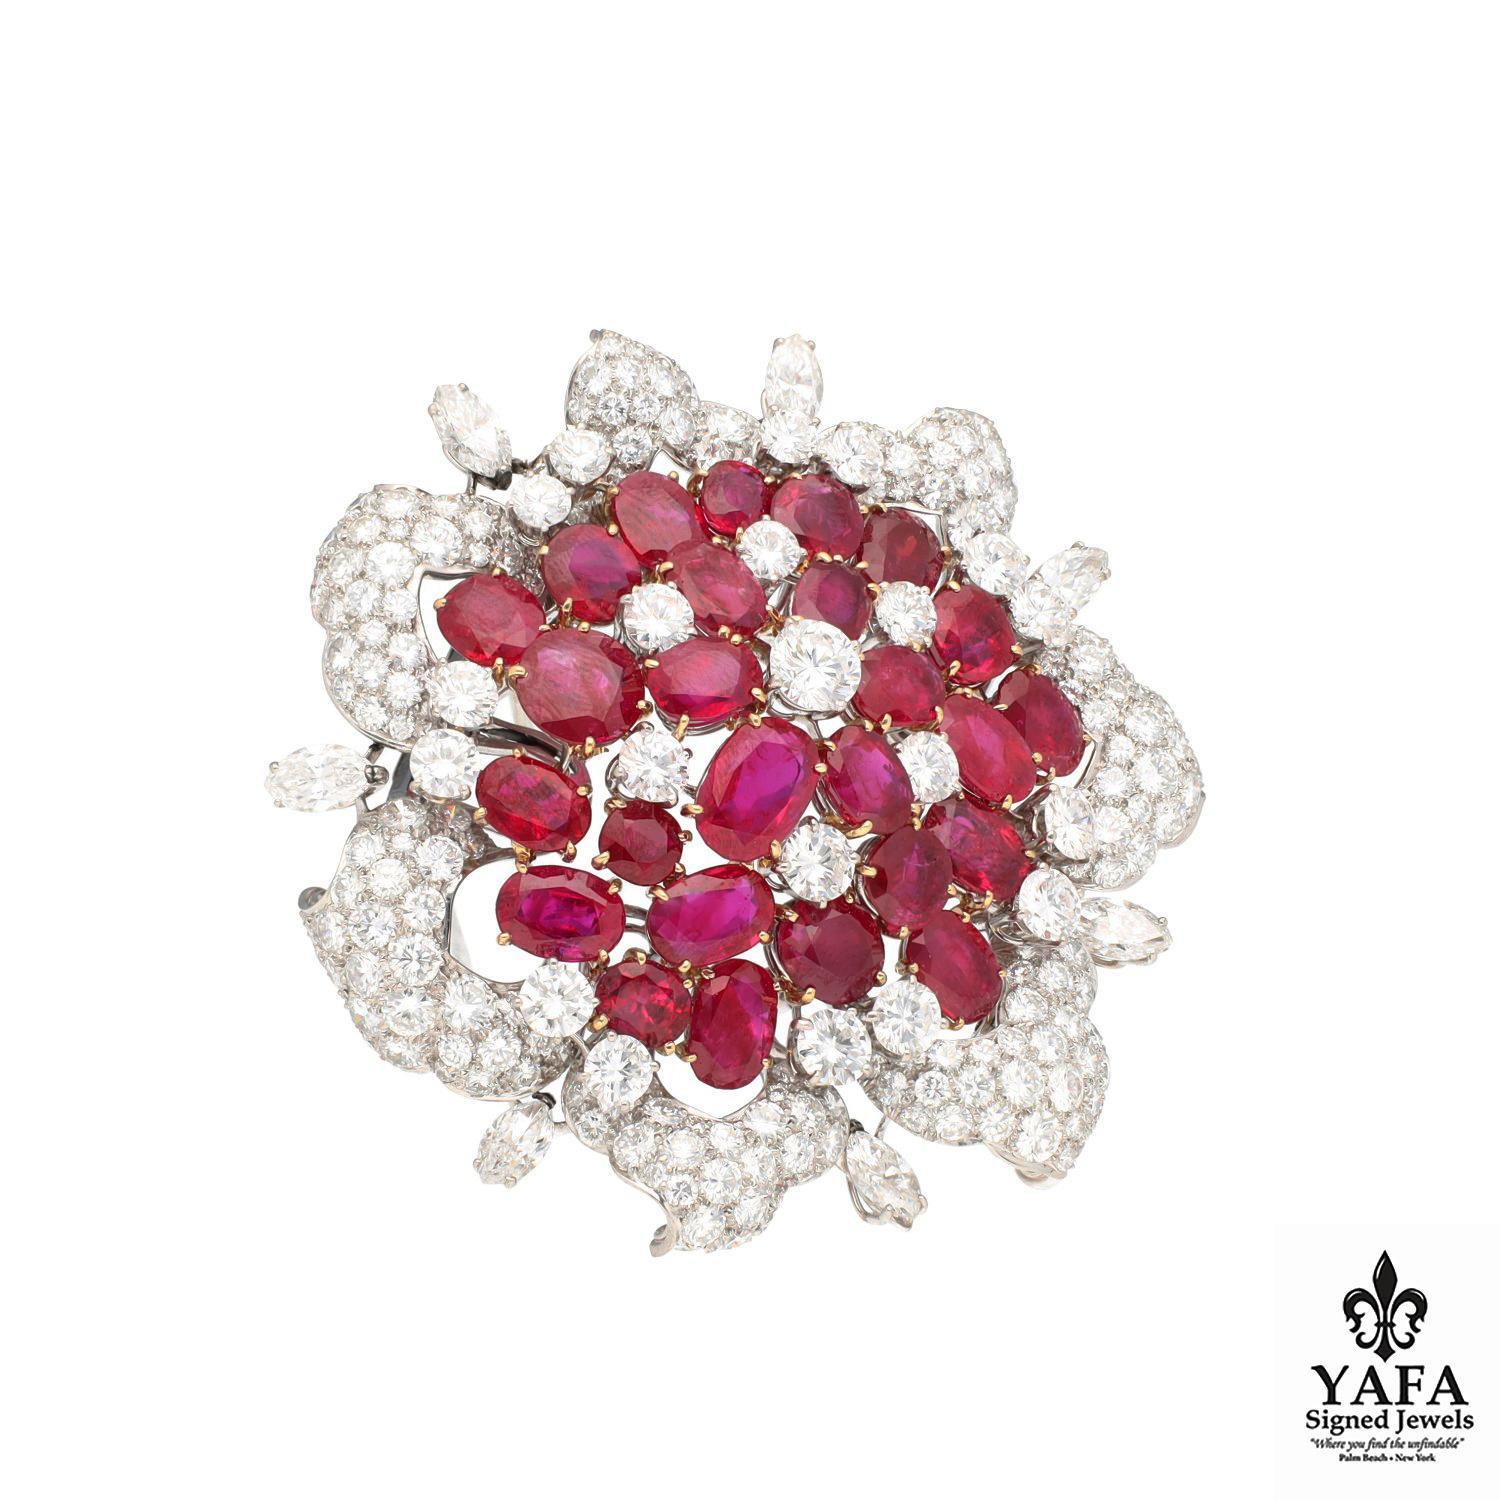 BULAGRI Burmese No-Heat Ruby and White Diamond Brooch Circa 1960's.
25 Rubies - Roundish and Oval Cut to Antique Cushion, Brilliant / Step Cut.
Total Ruby Weight Approximately - 25 CTS. Ranging from Approximately 1.4 CTS to 0.60 CTS.
7 Marquis White